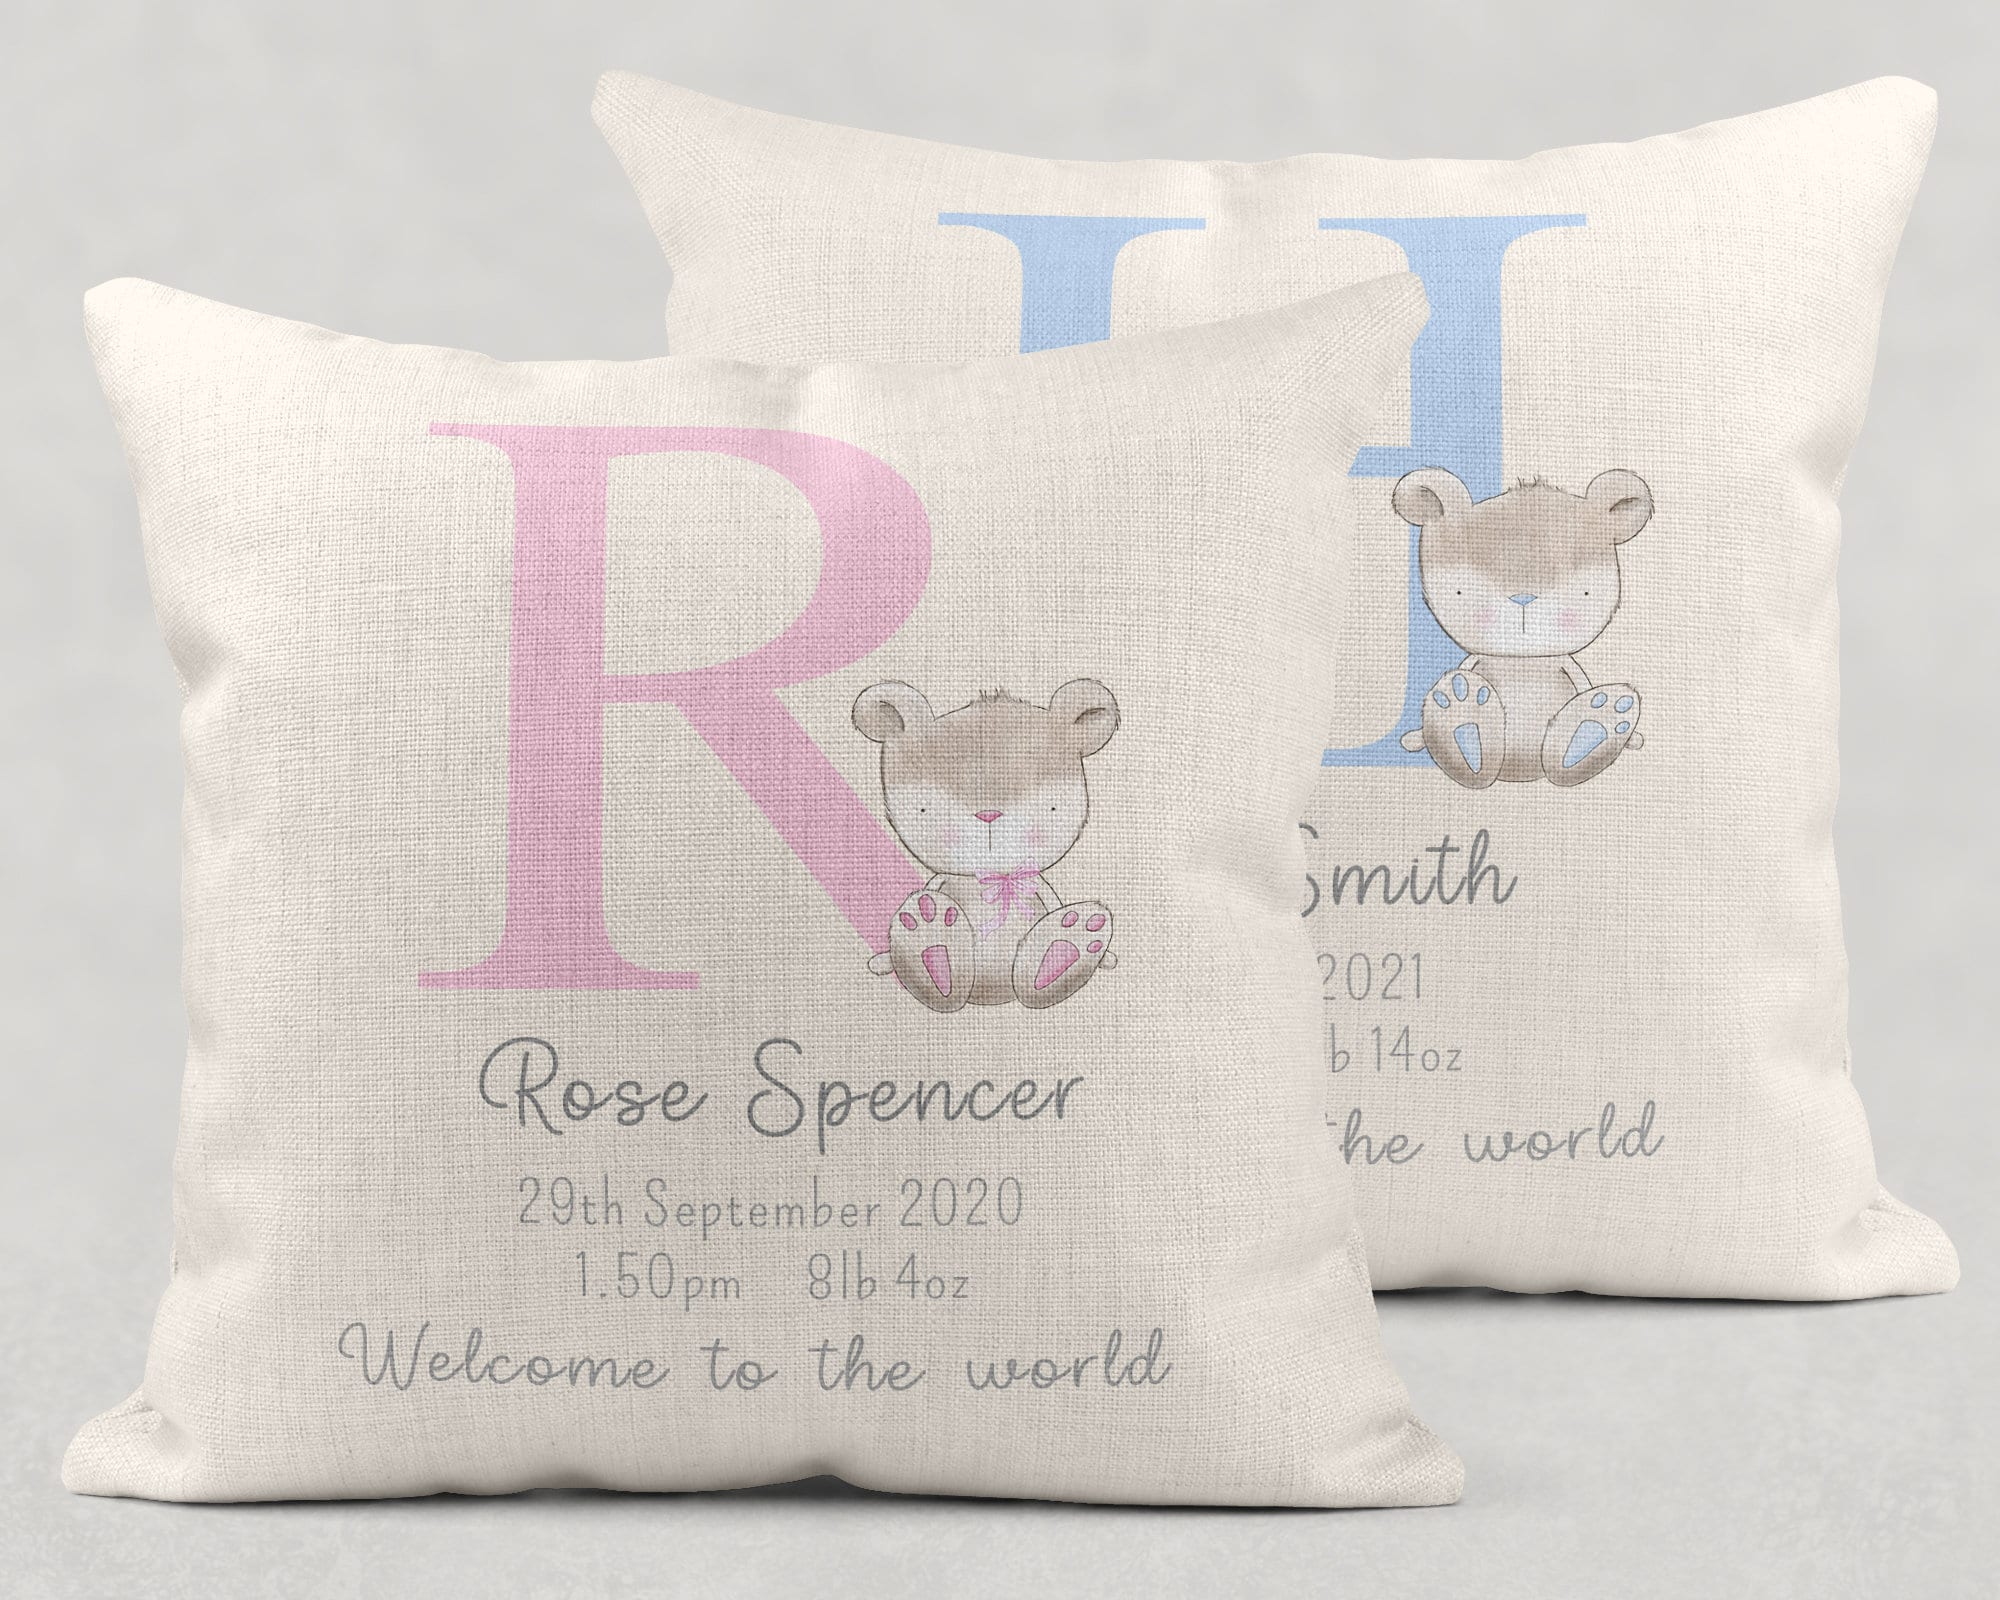 Personalised New Baby Cushion, Welcome To The World Cushion, New Baby Gifts, New Born Baby Gift,Teddy Cushion,New Baby Present, Baby cushion